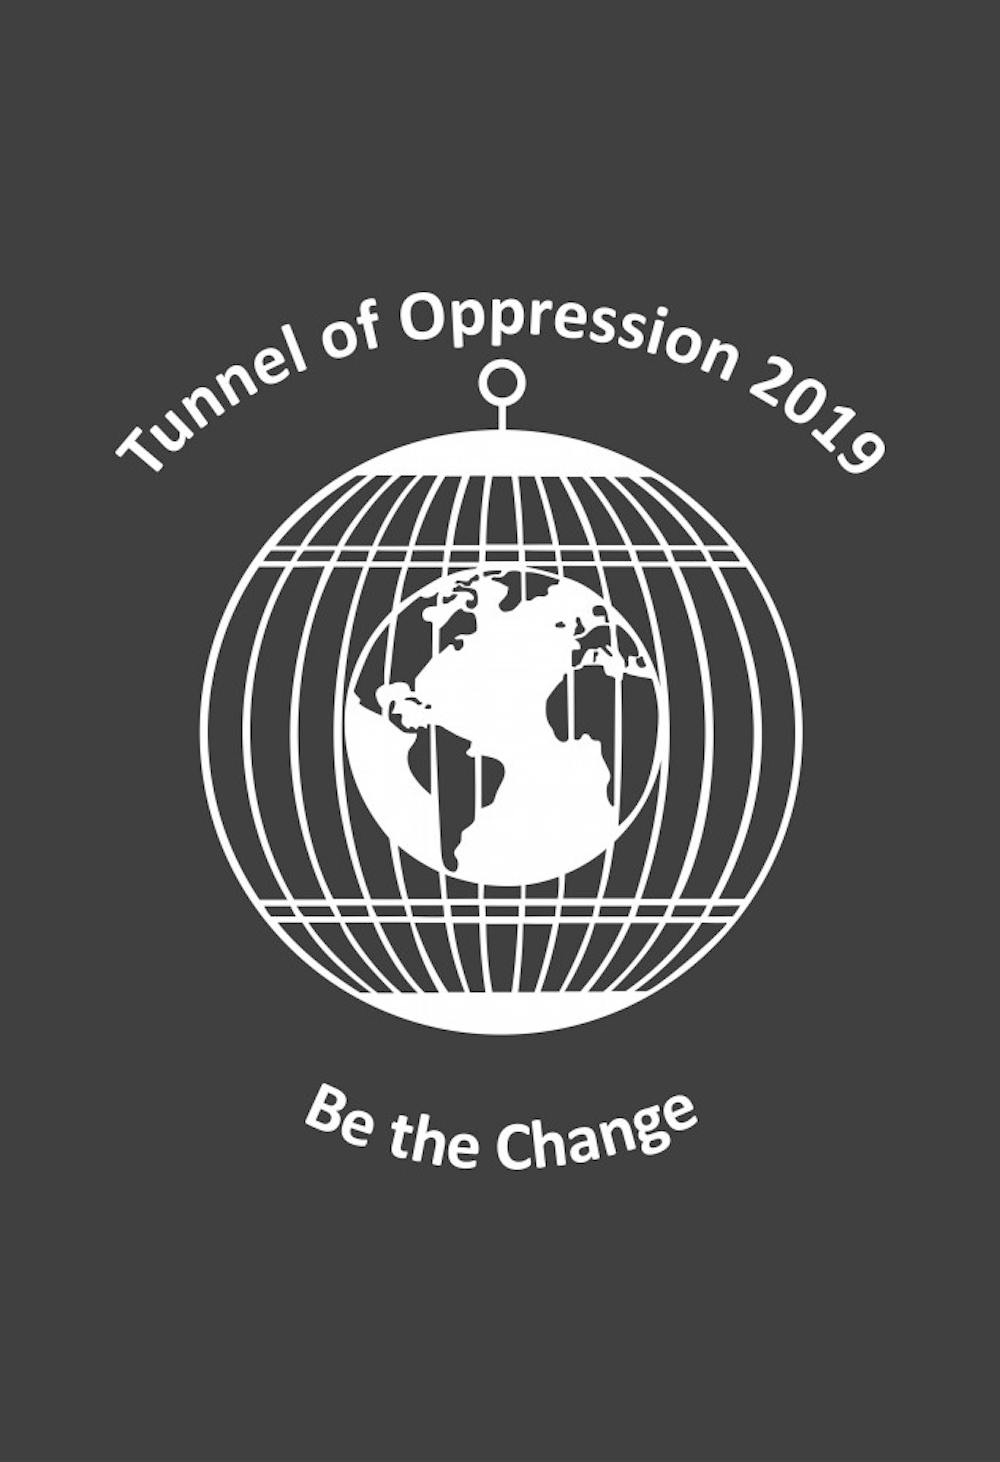 <p>The Tunnel of Oppression, an annual event during Unity Week, was held Thursday, Jan. 24 in the L.A. Pittenger Student Center Ballroom. Some of the exhibits dealt with issues like homophobia, sexual assault and racism. <strong>Drew Leininger, Photo Provided.</strong></p>